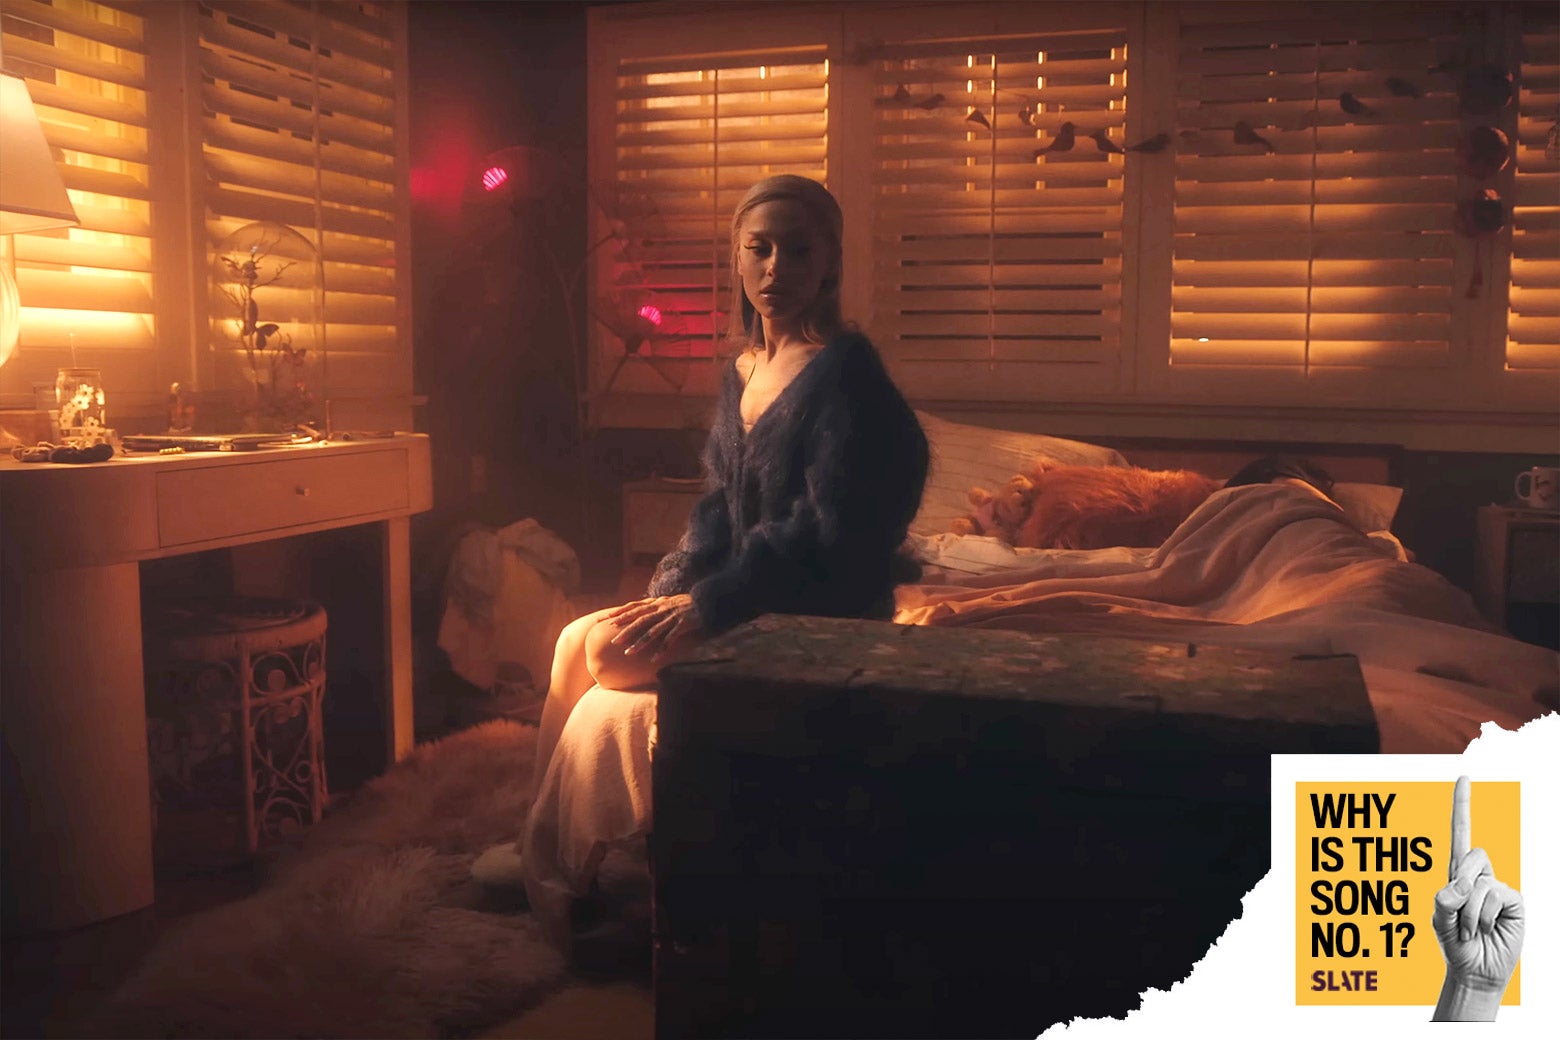 A still shows the singer sitting on the side of the bed in the morning light with another figure still asleep behind her. In the corner a logo reads "Why Is This Song No. 1?" and is branded Slate